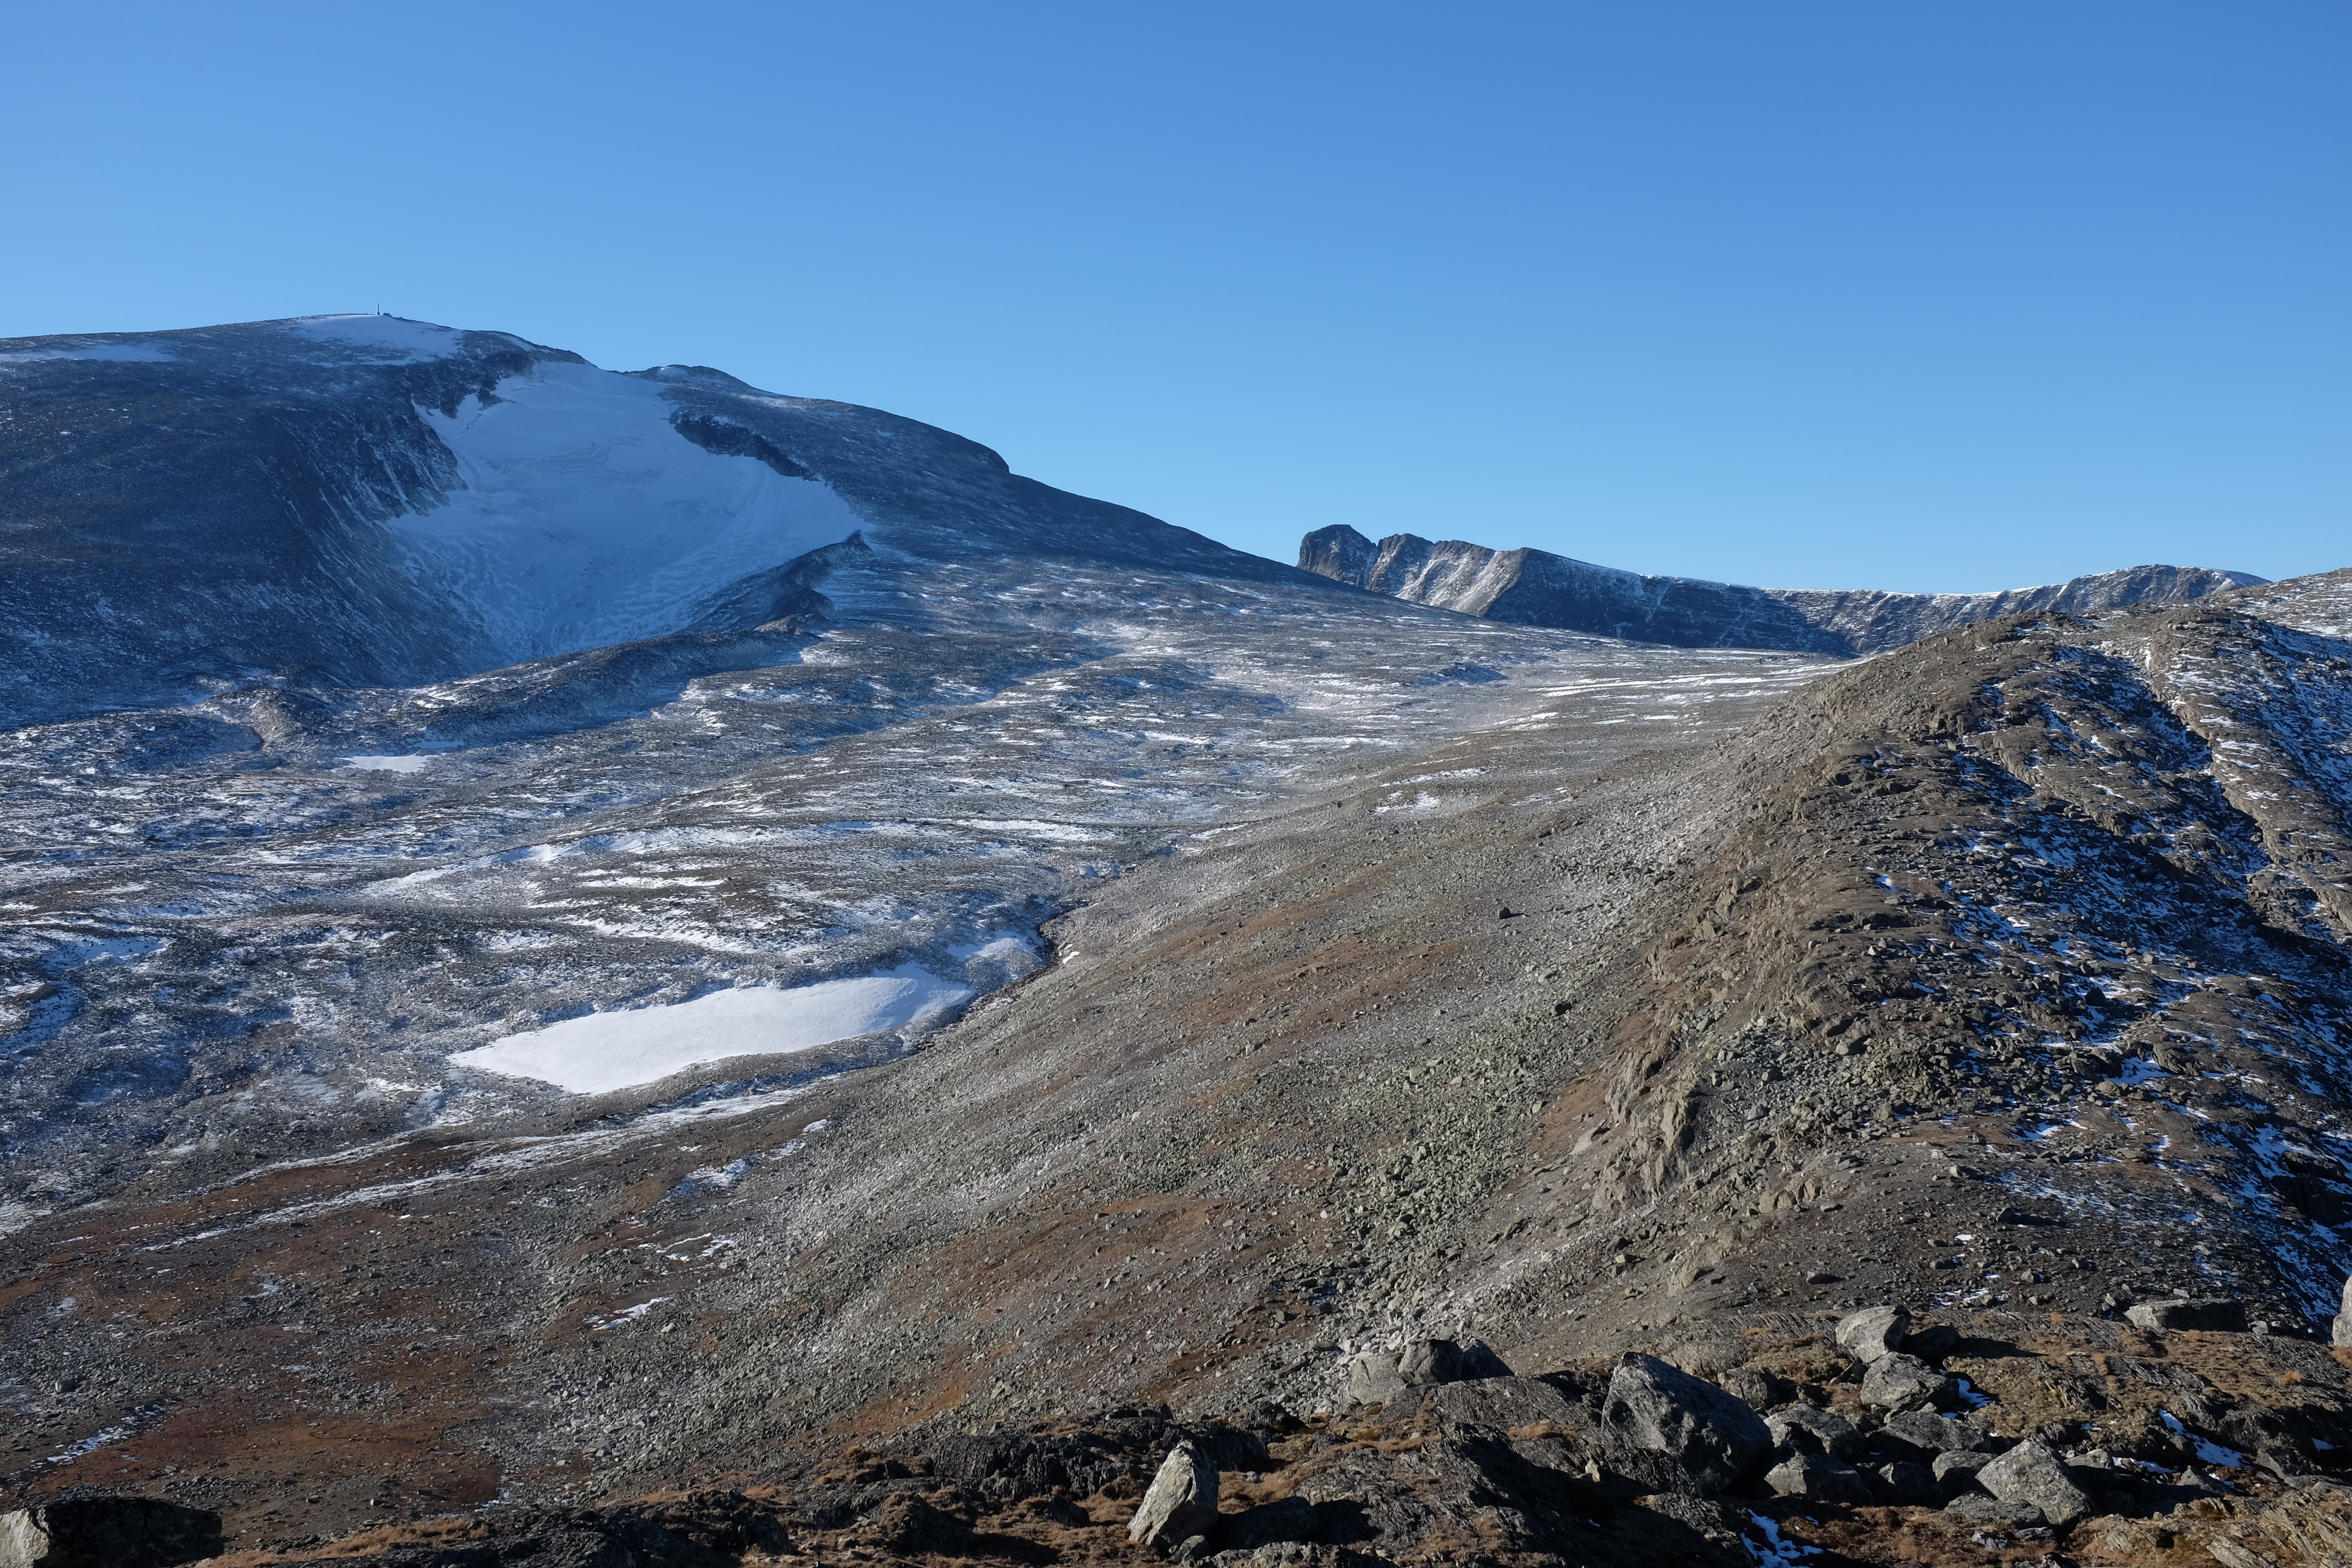 View from north towards Snøhetta mountain peak in Dovrefjell National Park, Norway